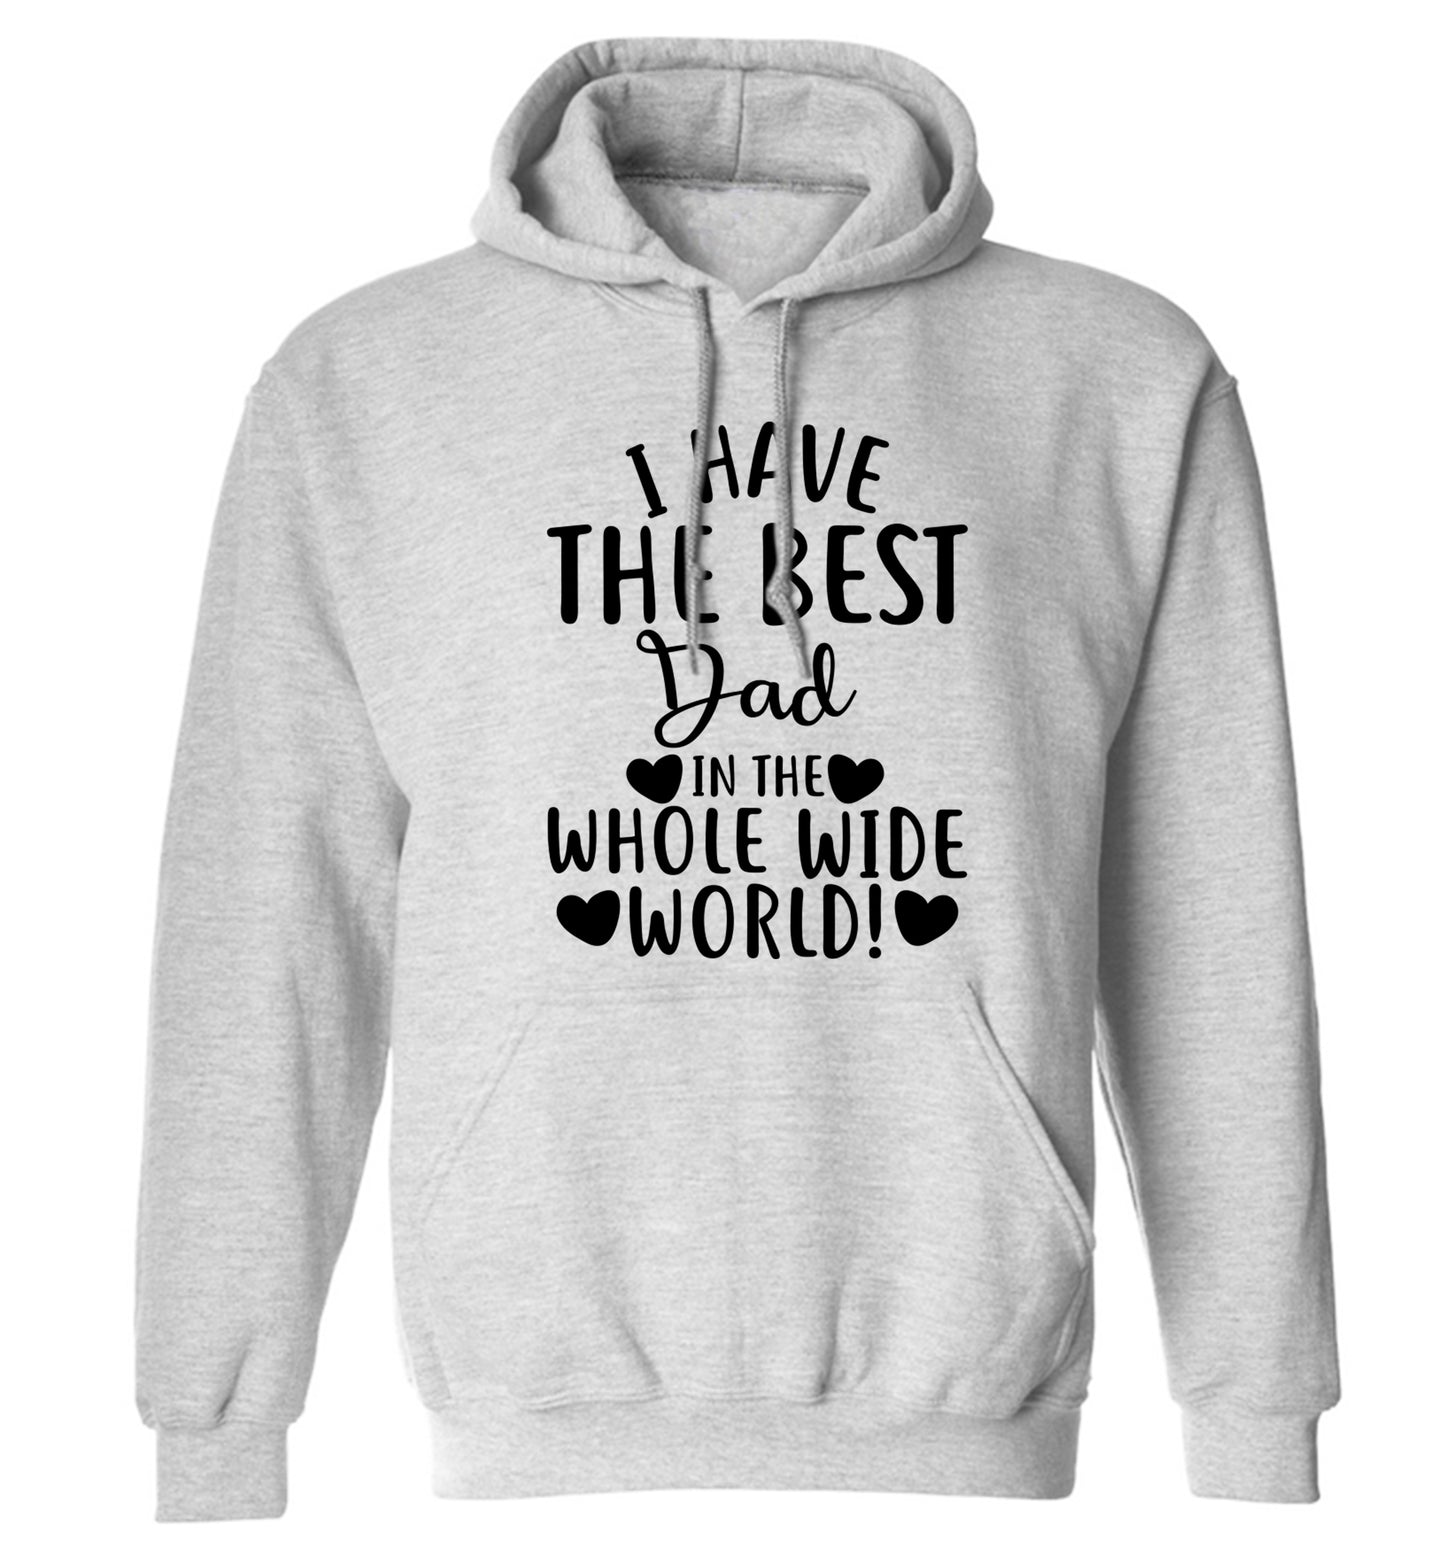 I have the best dad in the whole wide world! adults unisex grey hoodie 2XL